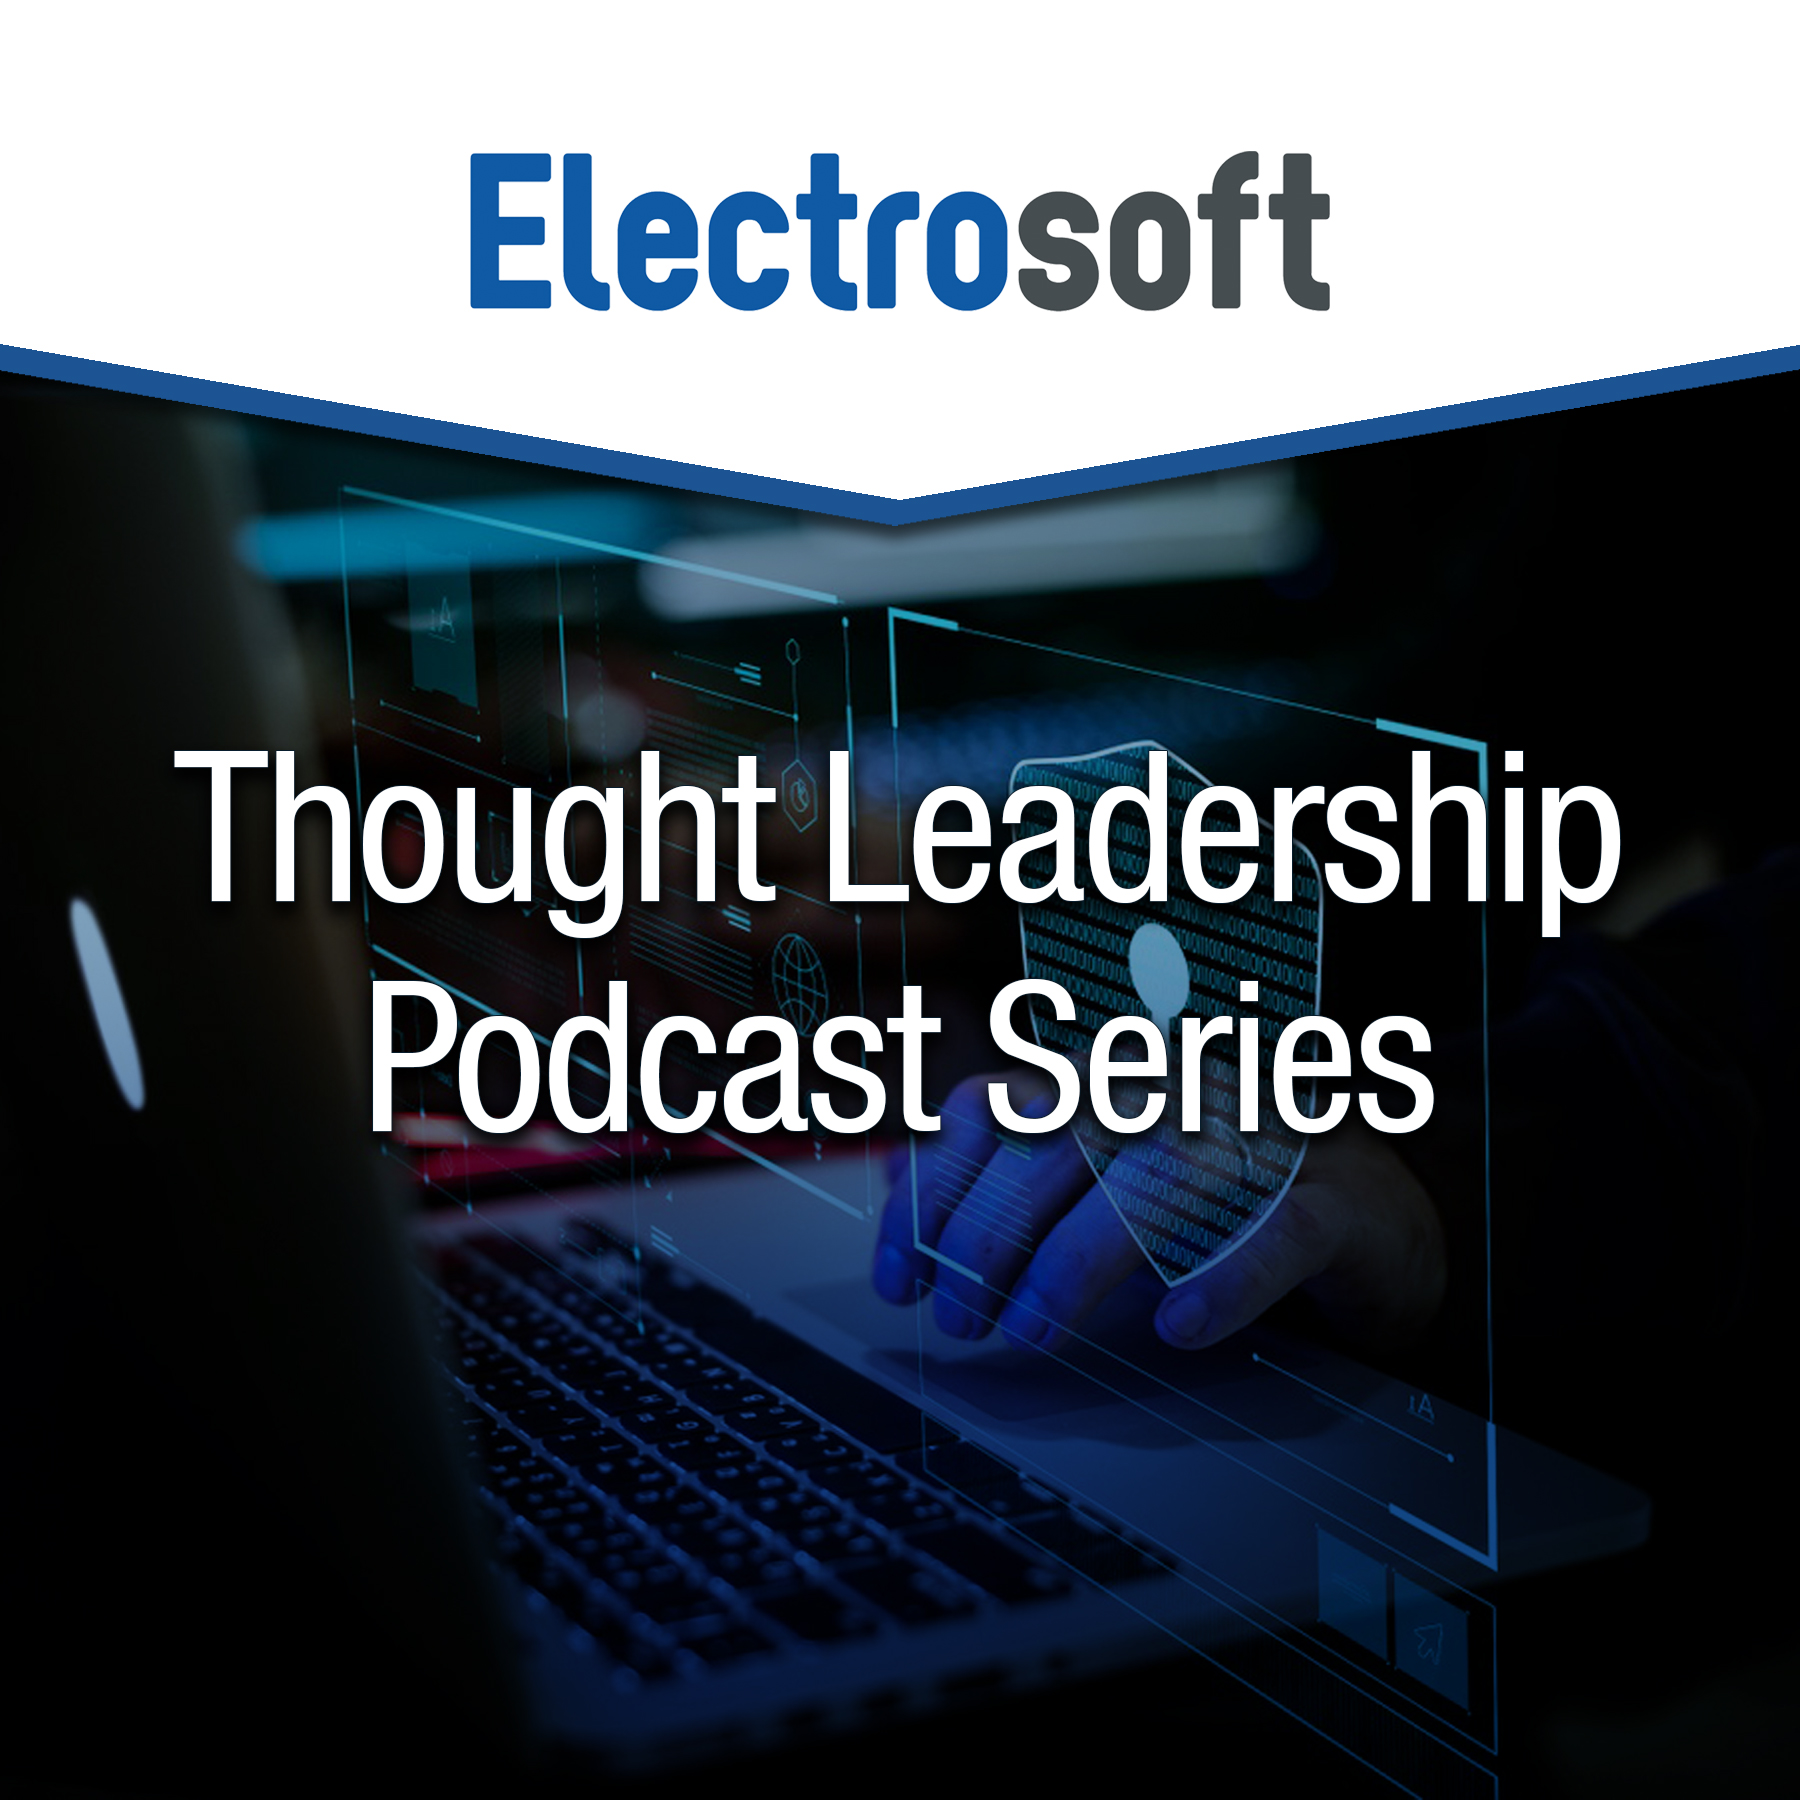 Electrosoft, Thought Leadership Podcast Series